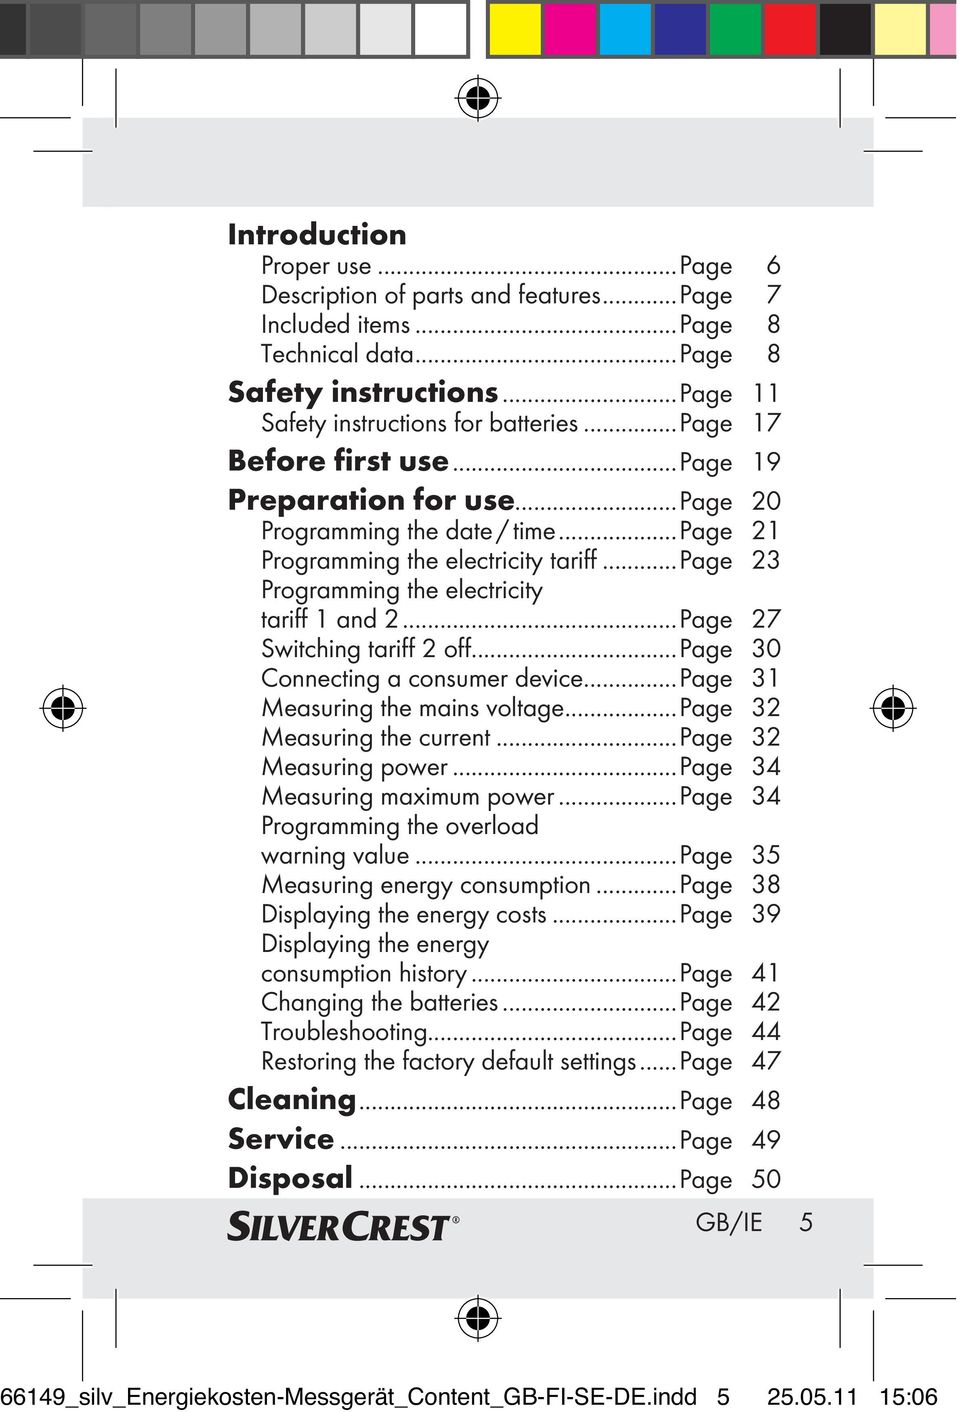 ..Page 27 Switching tariff 2 off...page 30 Connecting a consumer device...page 31 Measuring the mains voltage...page 32 Measuring the current...page 32 Measuring power...page 34 Measuring maximum power.